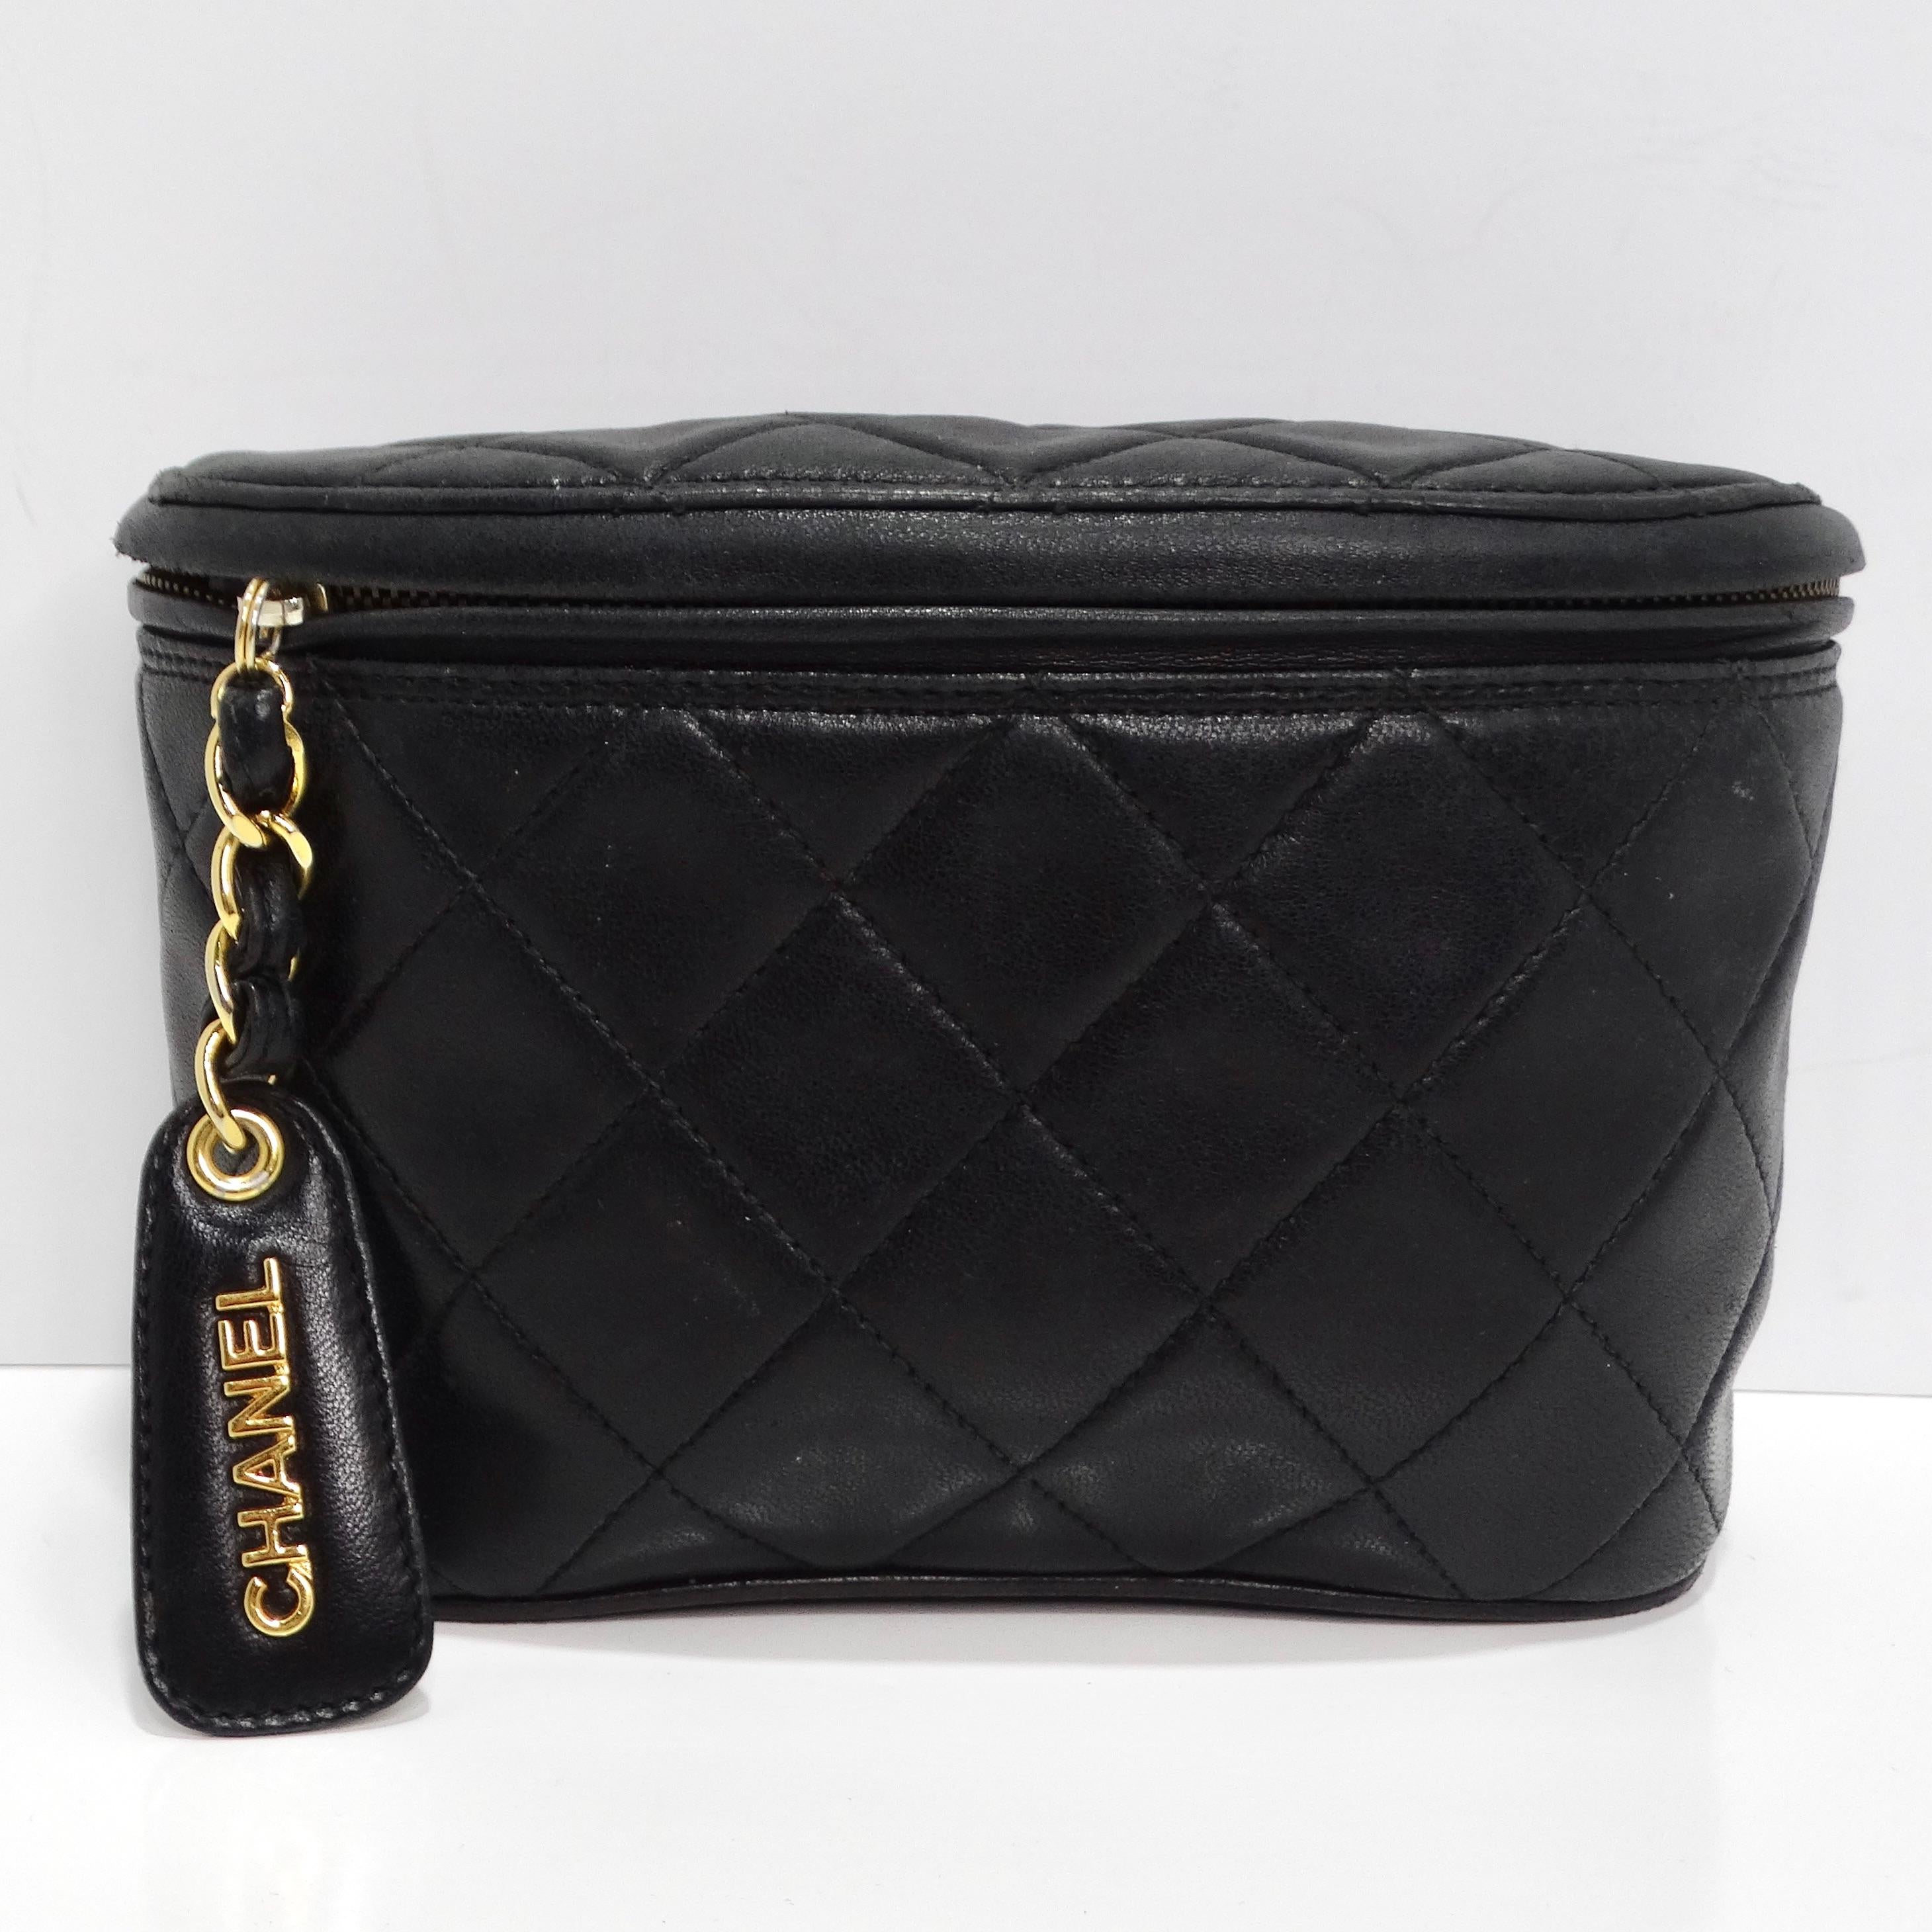 Introducing the rare and exquisite Chanel 1995 Black Caviar Leather Belt Bag, a timeless and iconic accessory that epitomizes luxury and sophistication. Crafted from luxurious black caviar leather, this belt bag features Chanel's signature quilted